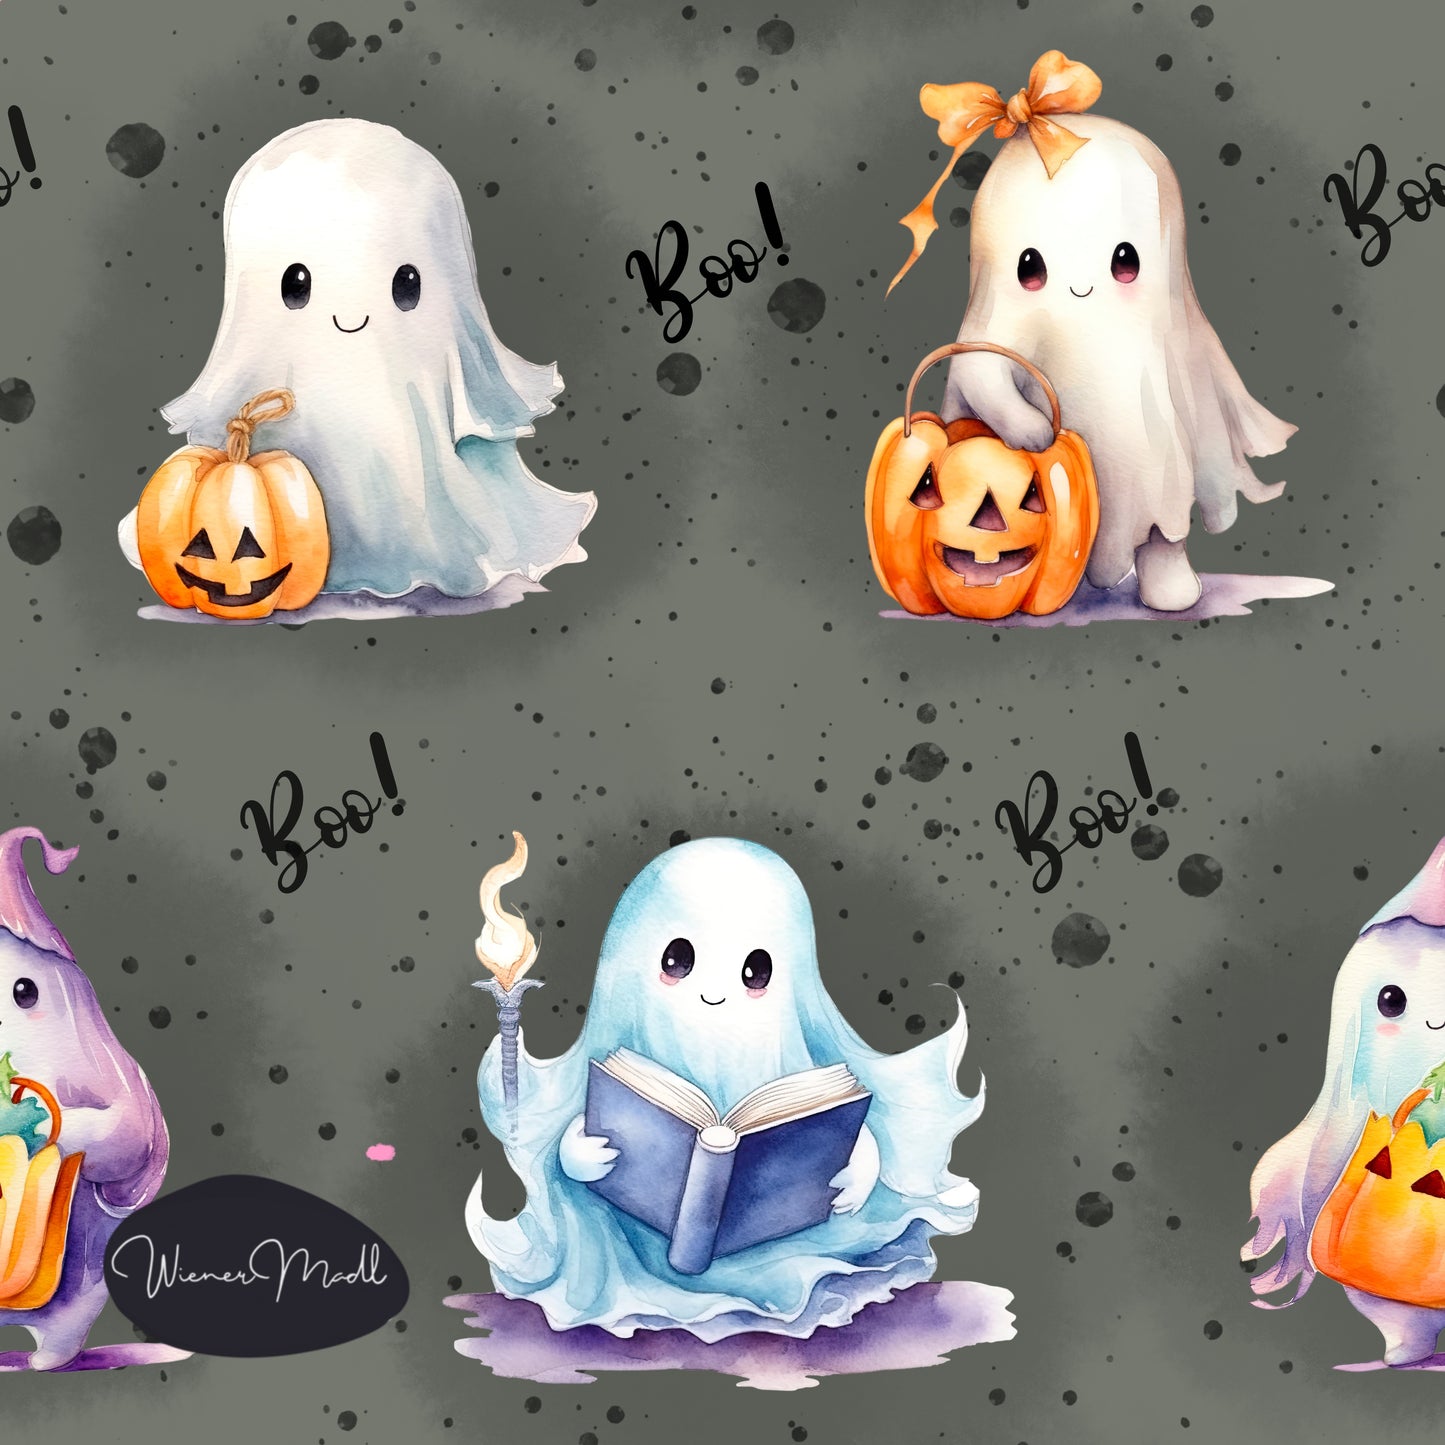 seamless repeat pattern -boo! ghosts- exclusive graphic design